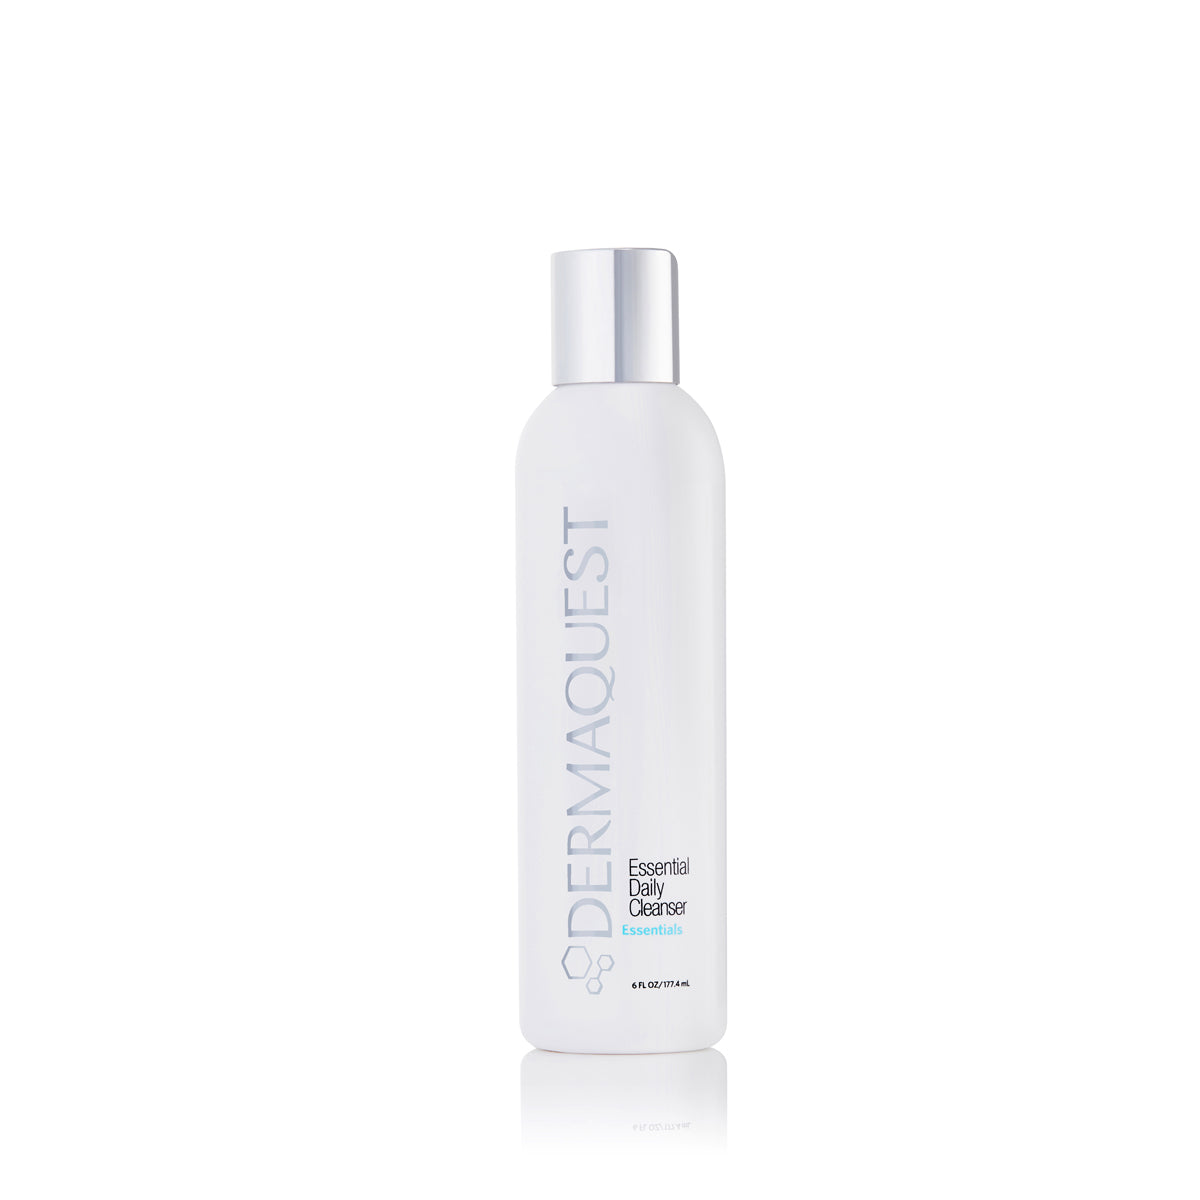 DermaQuest Essential Daily Cleanser